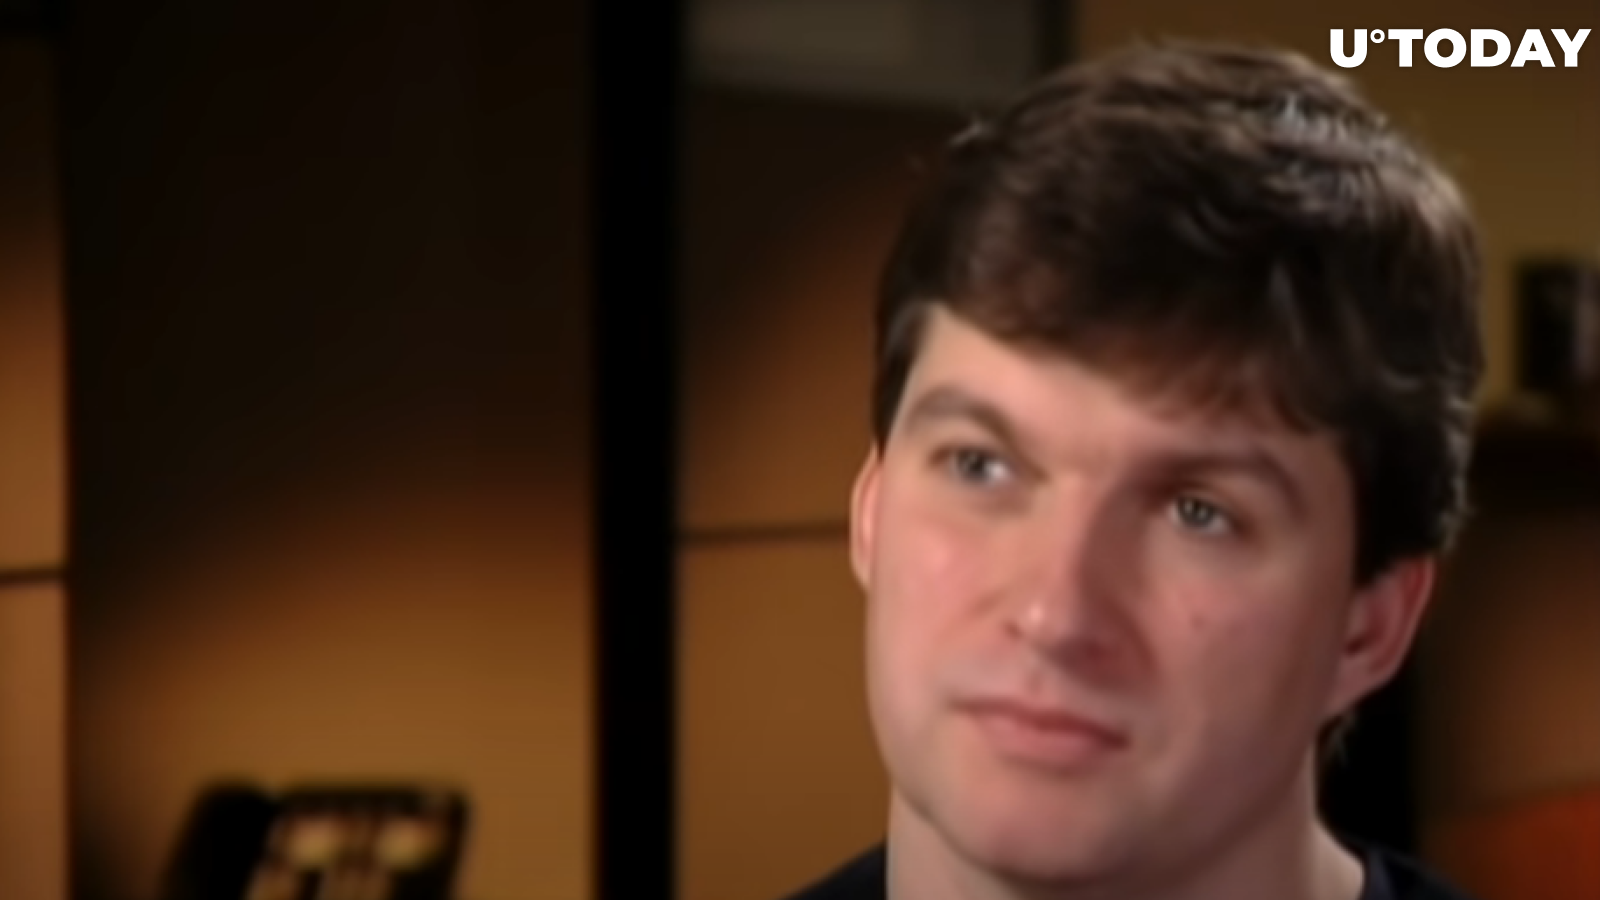 Michael Burry of "Big Short" Fame Has Warning About $7 Trillion Worth of Stocks That Are Exposed to Crypto